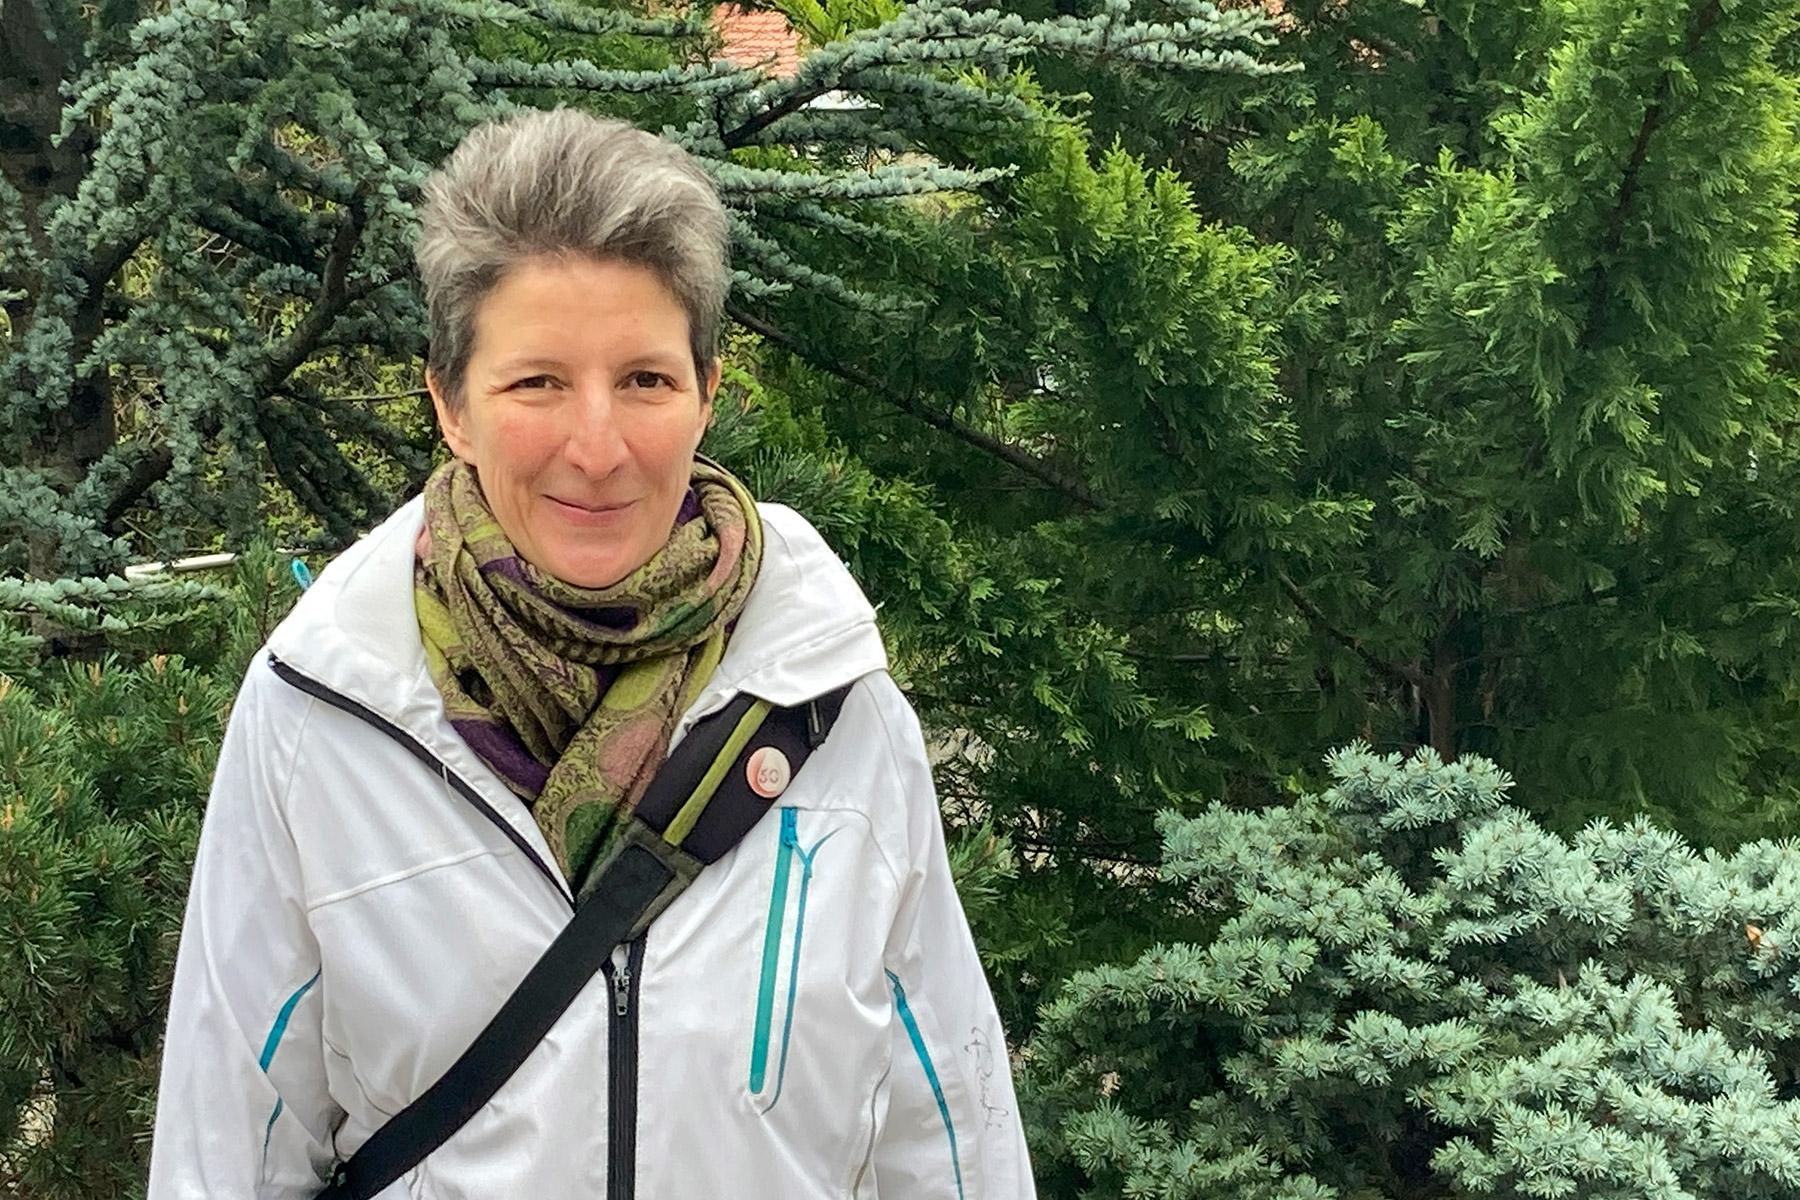 Kinga Marjatta Pap from the Evangelical Lutheran Church in Hungary is the Chairperson of the International Worship Planning Committee for the Assembly. Photo: private